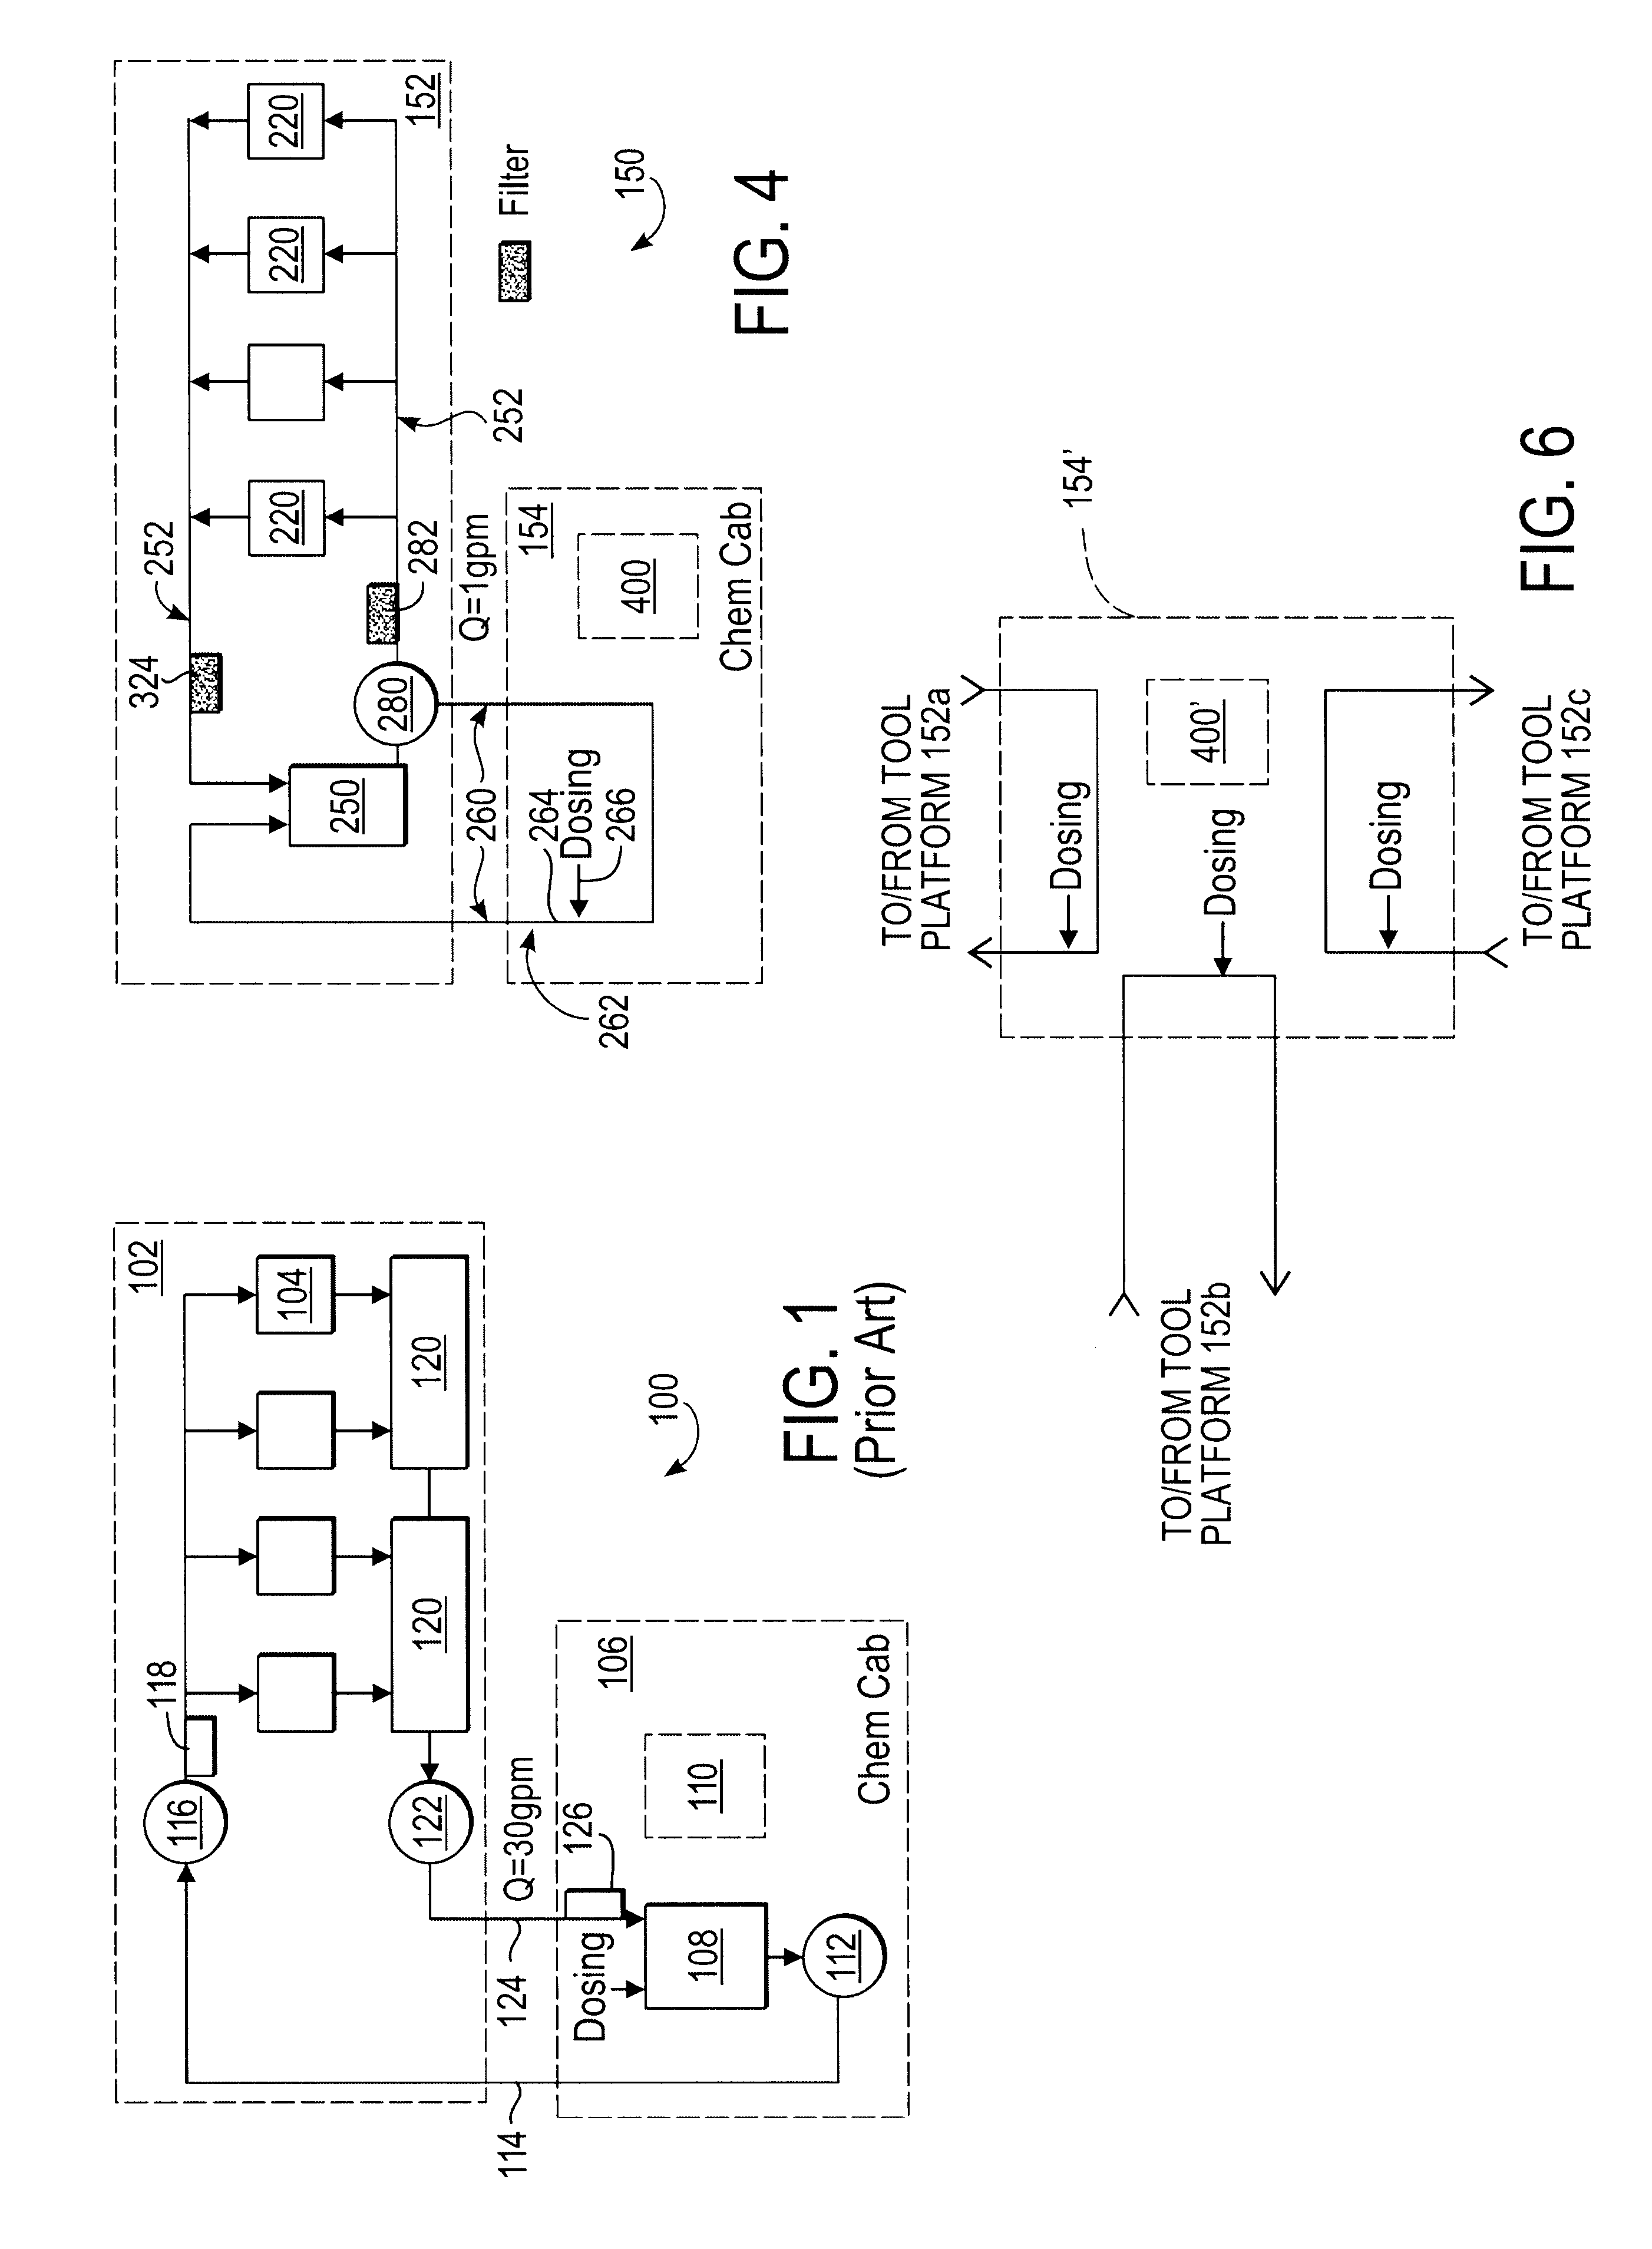 Apparatus and method for electro chemical deposition